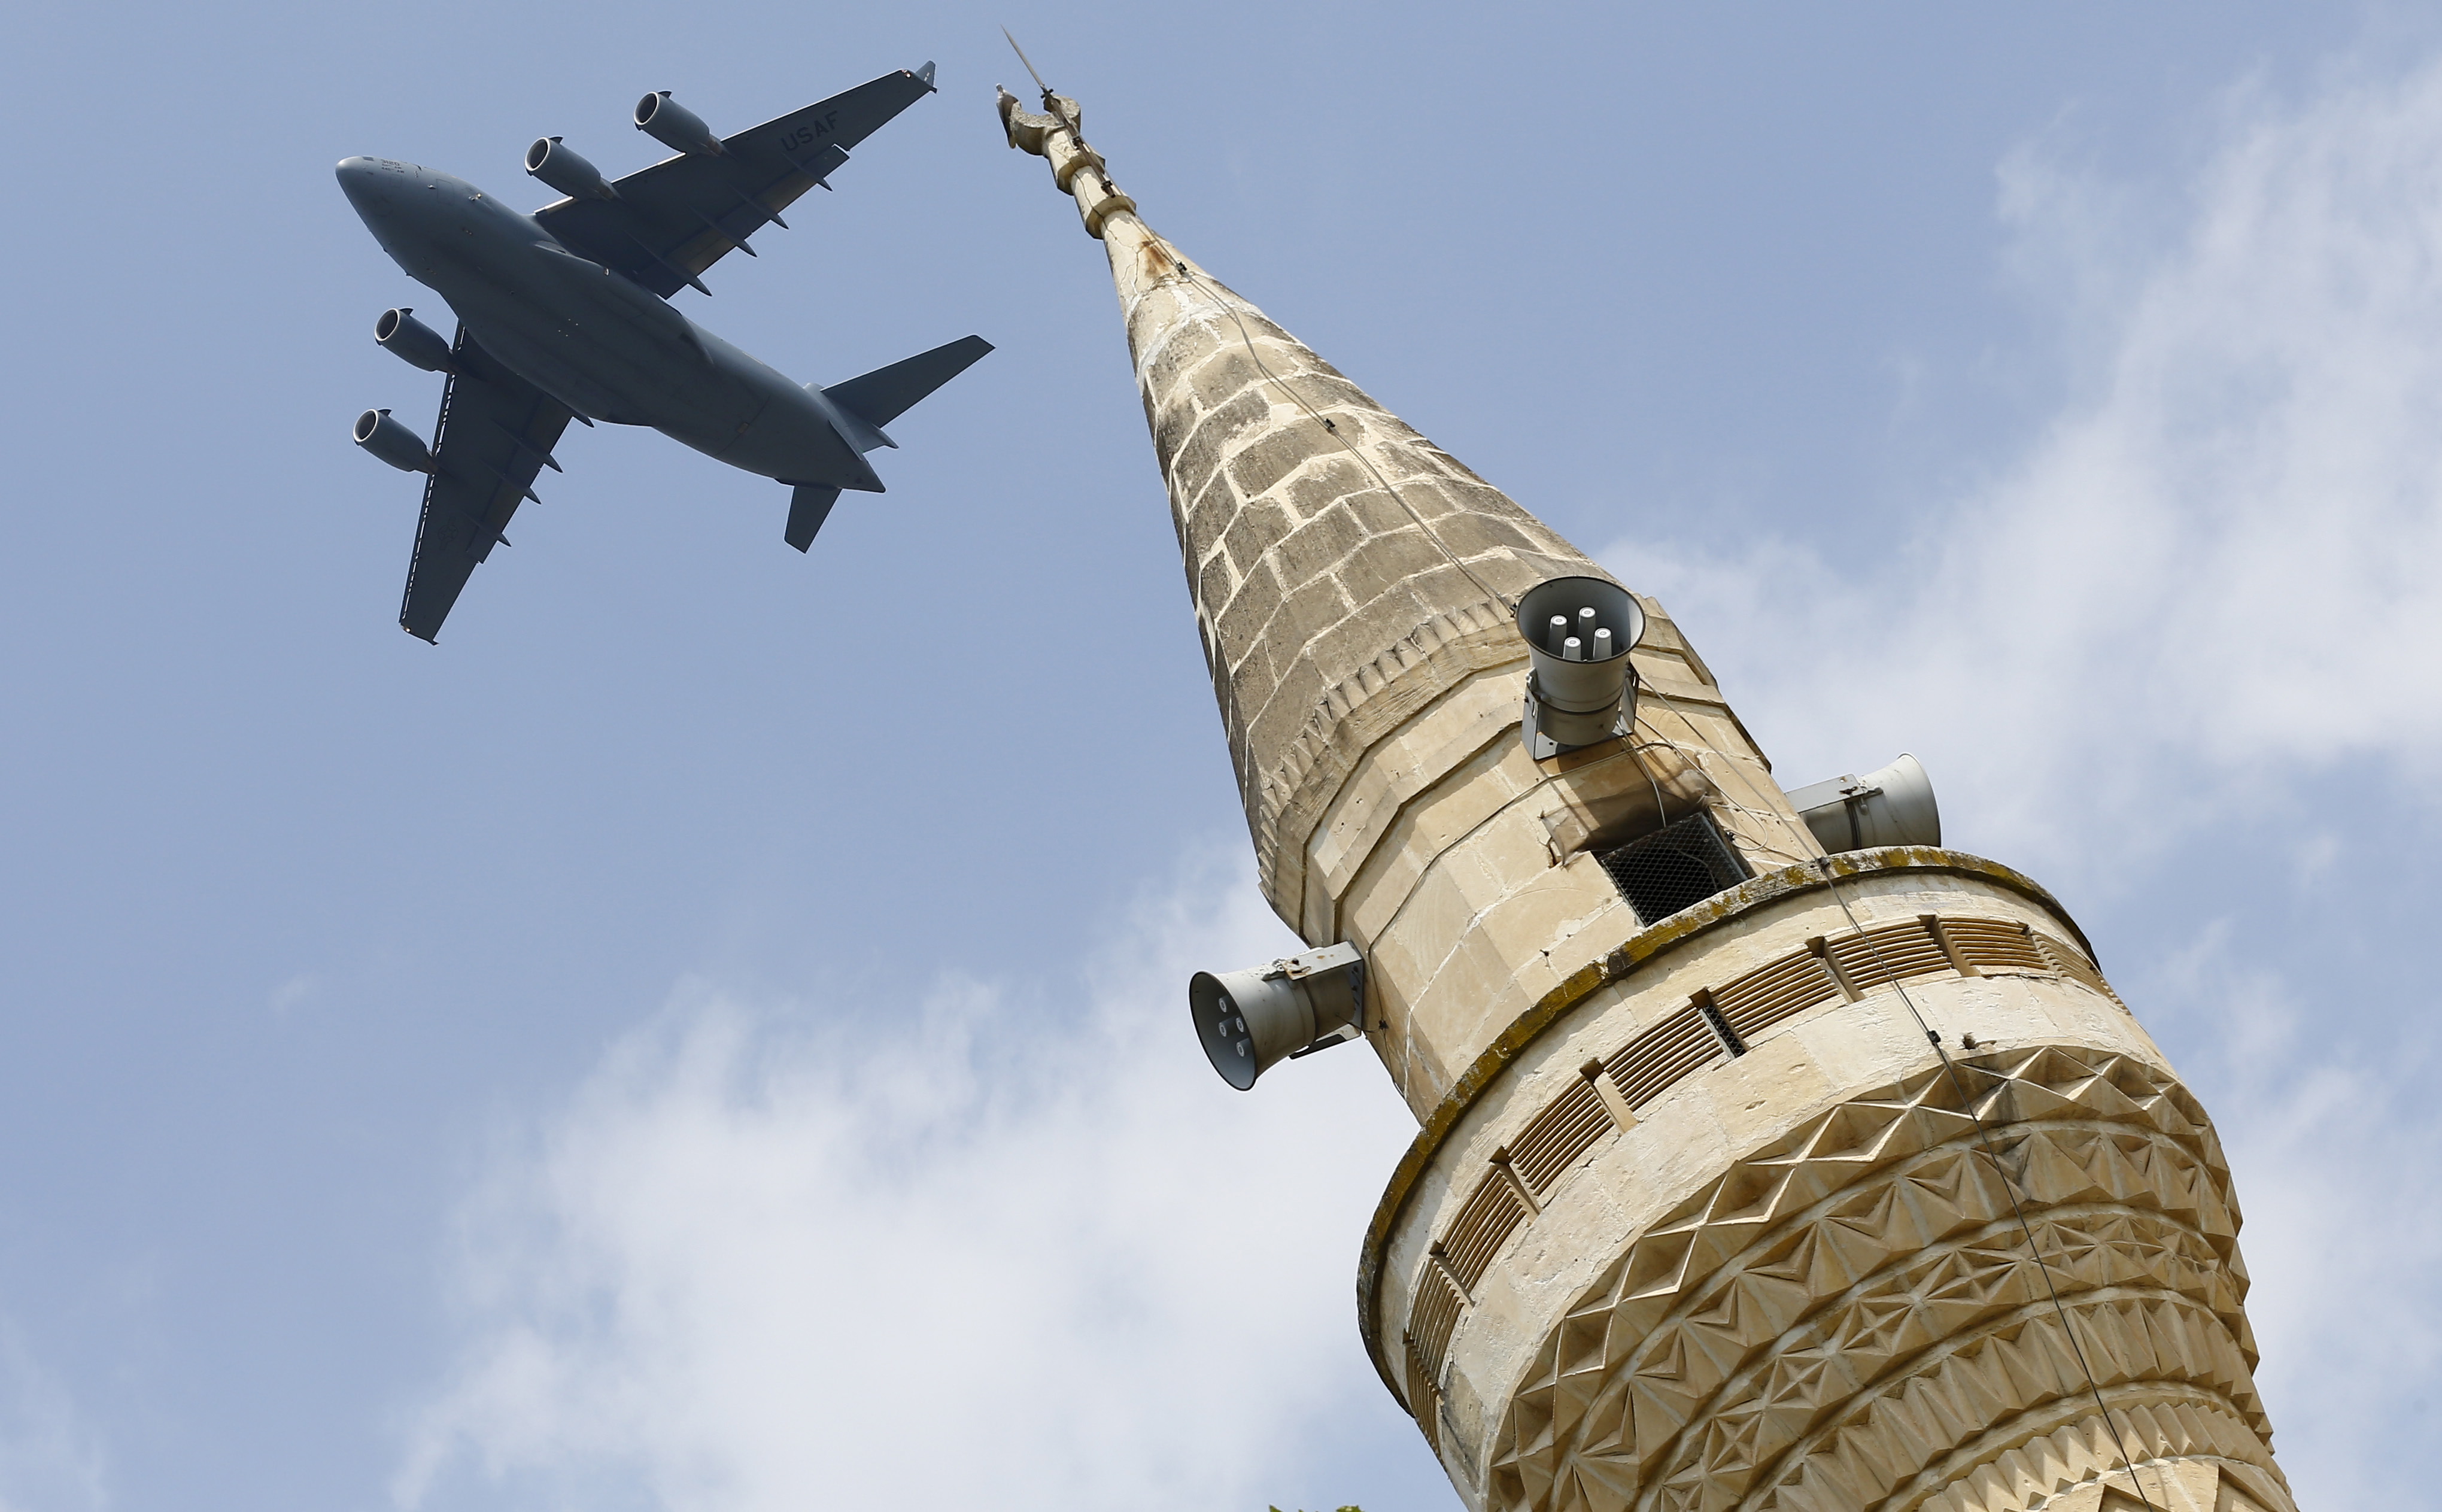 A U.S. Air Force Boeing C-17A Globemaster III large transport aircraft flies over a minaret after taking off from Incirlik air base in Adana